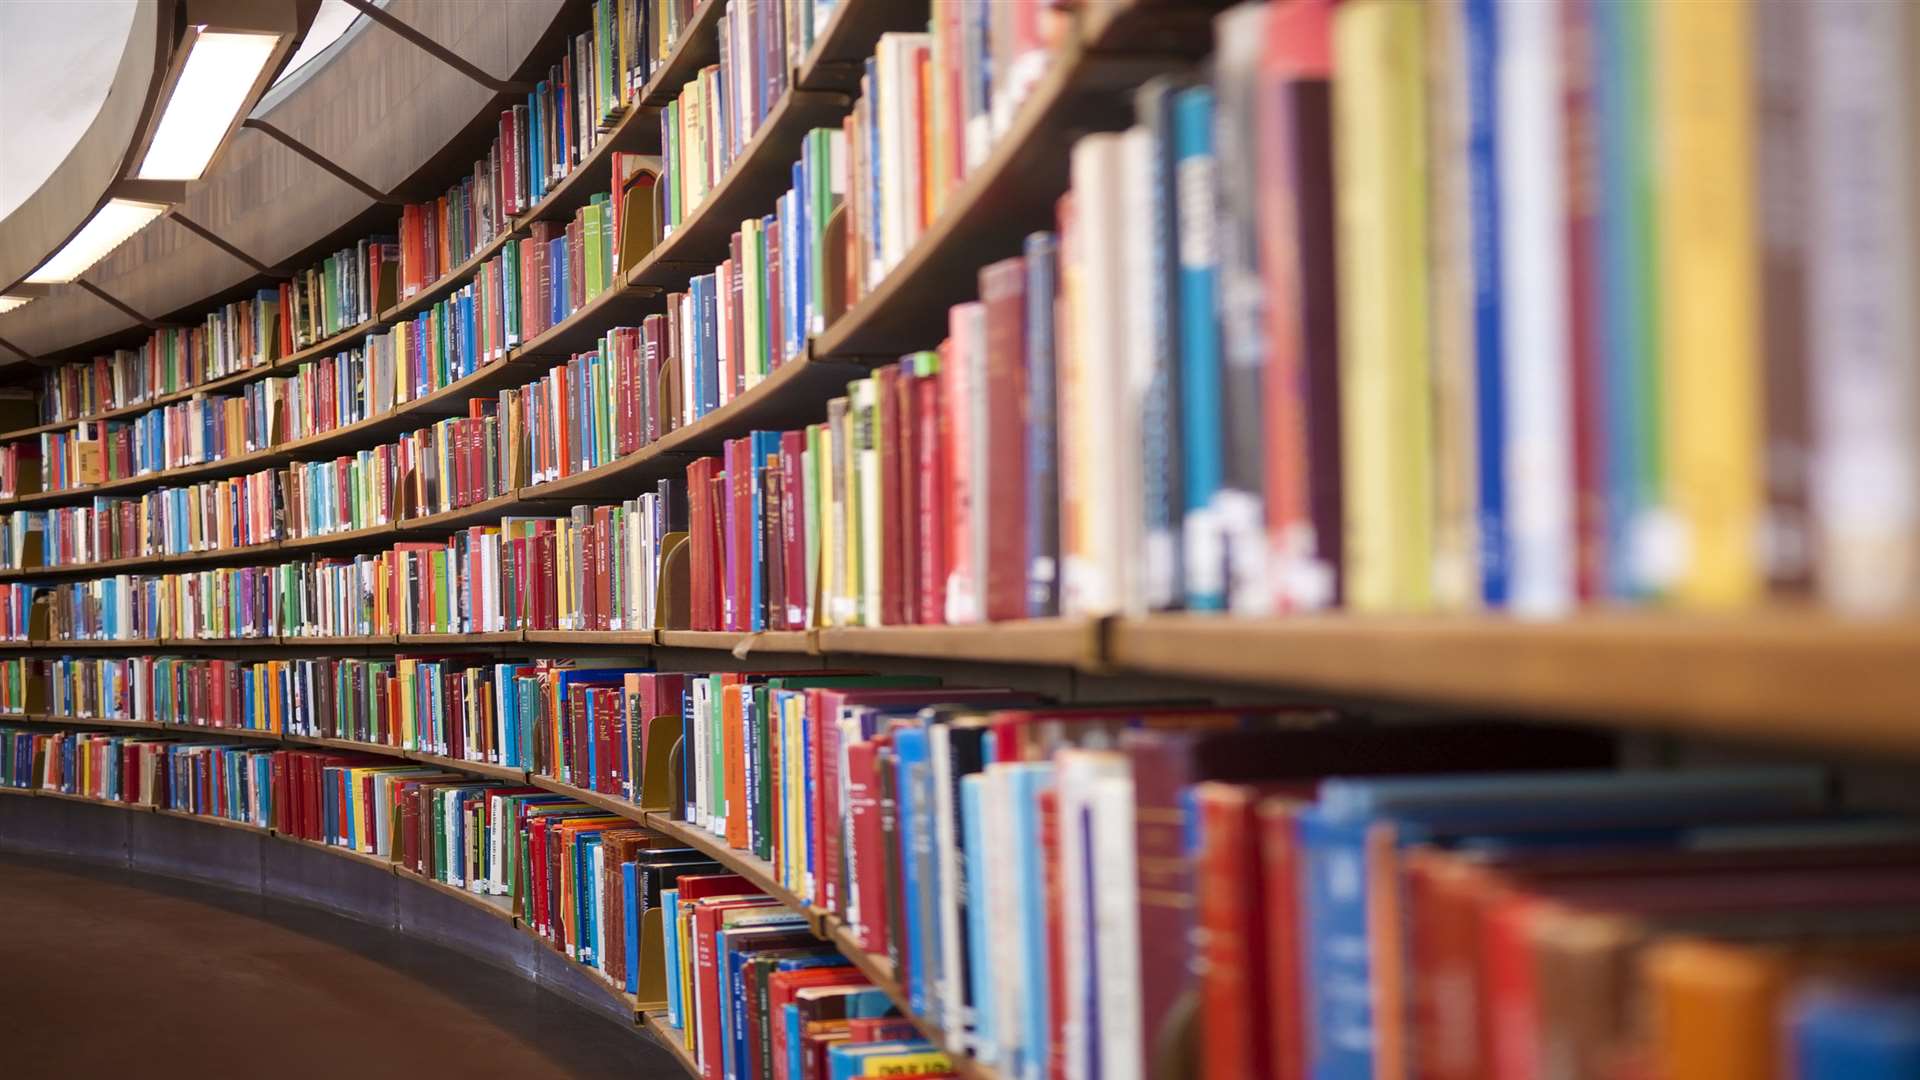 A lack of WiFi in many libraries is fuelling their decline according to a government survey